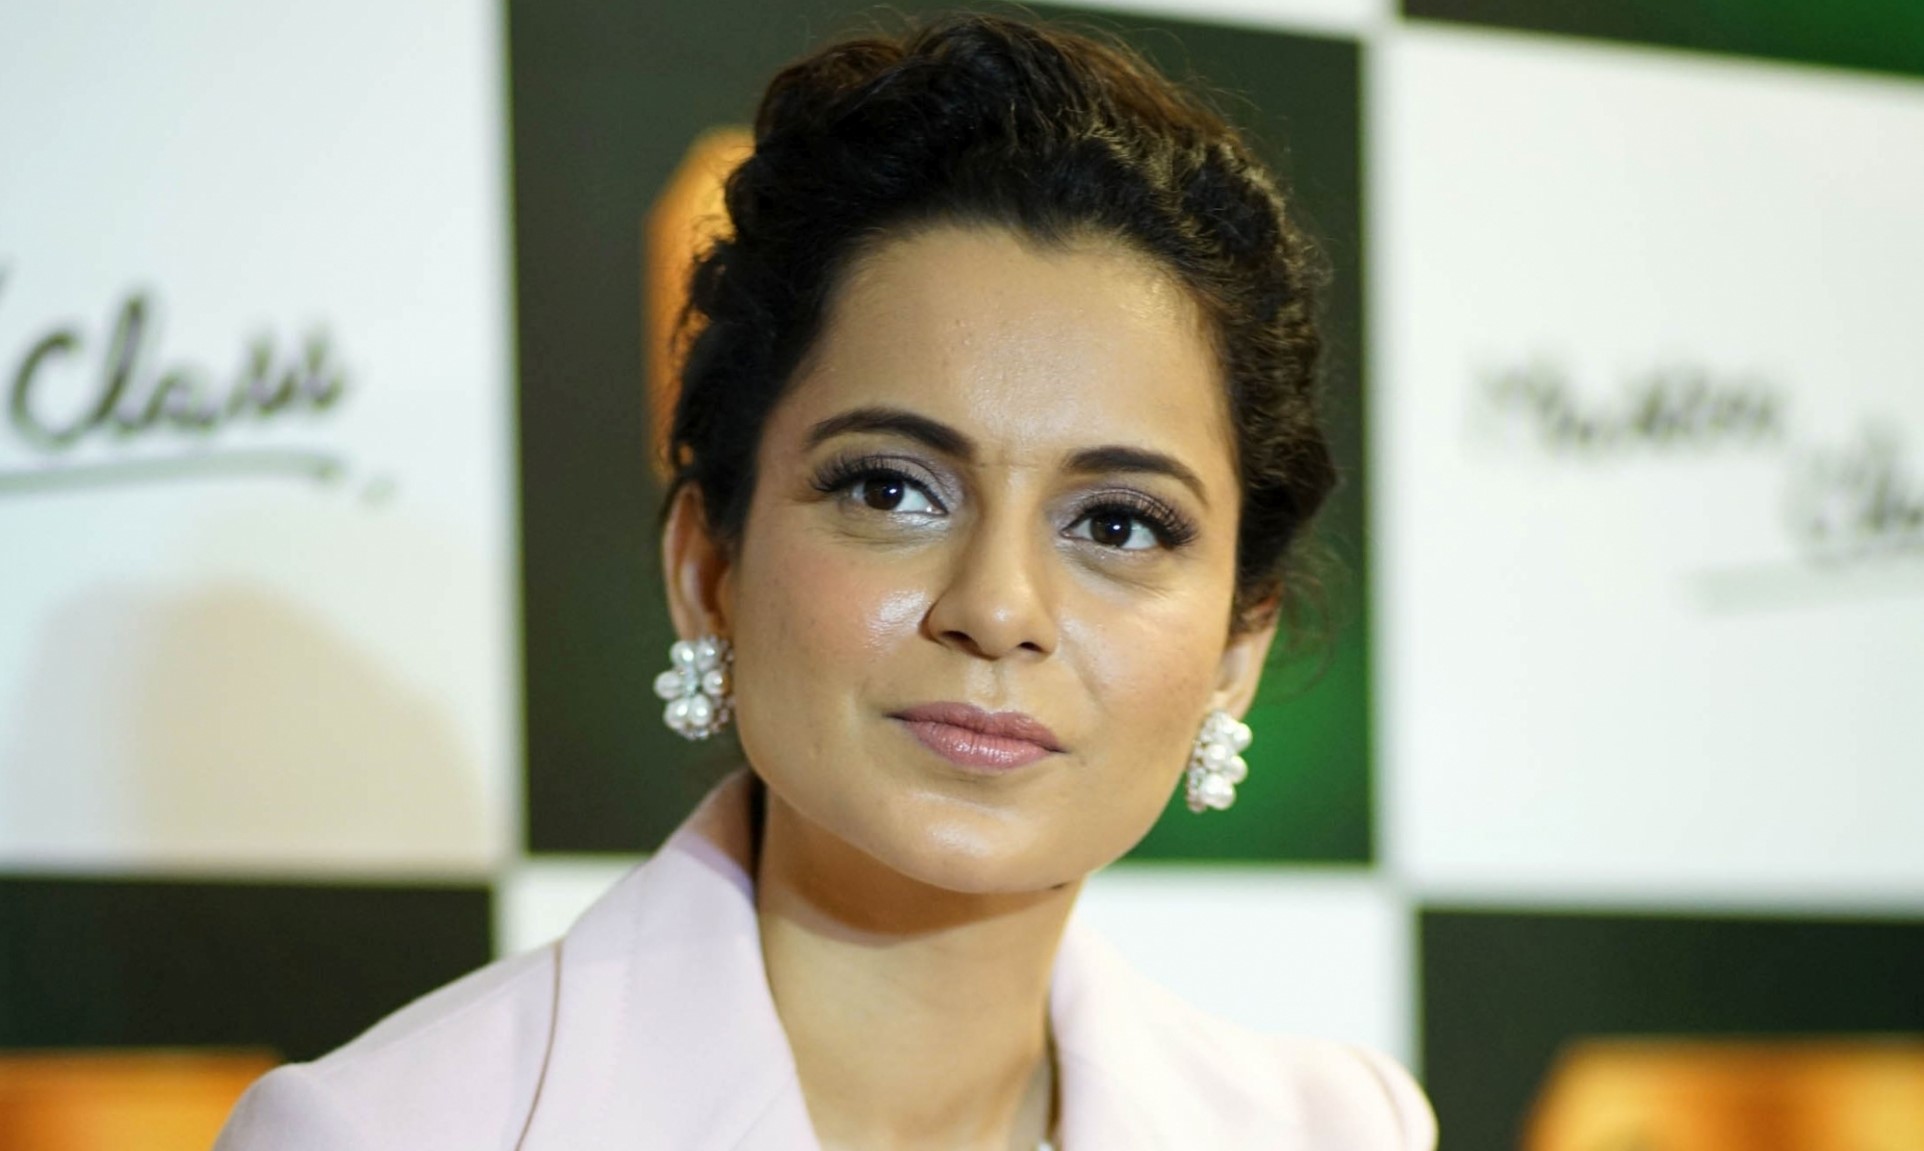 
Kangana Ranaut given Y-plus security by Centre, to be guarded by 10 armed commandos
